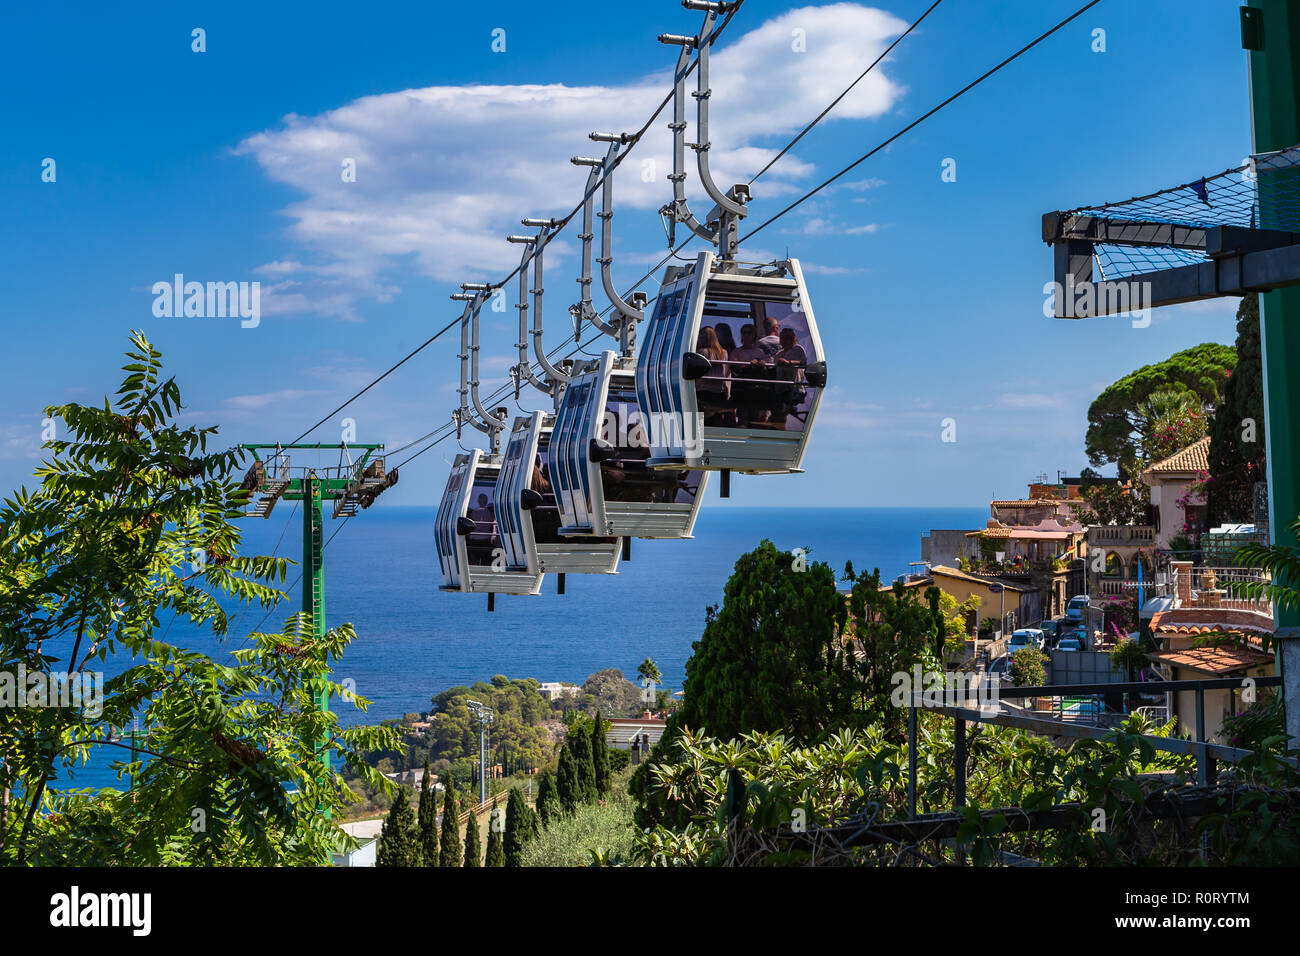 Taormina, Italy - September 26, 2018: Beautiful Sicilian landscape with cable cars 'funivia' that connect the historic center of Taormina with its bea Stock Photo